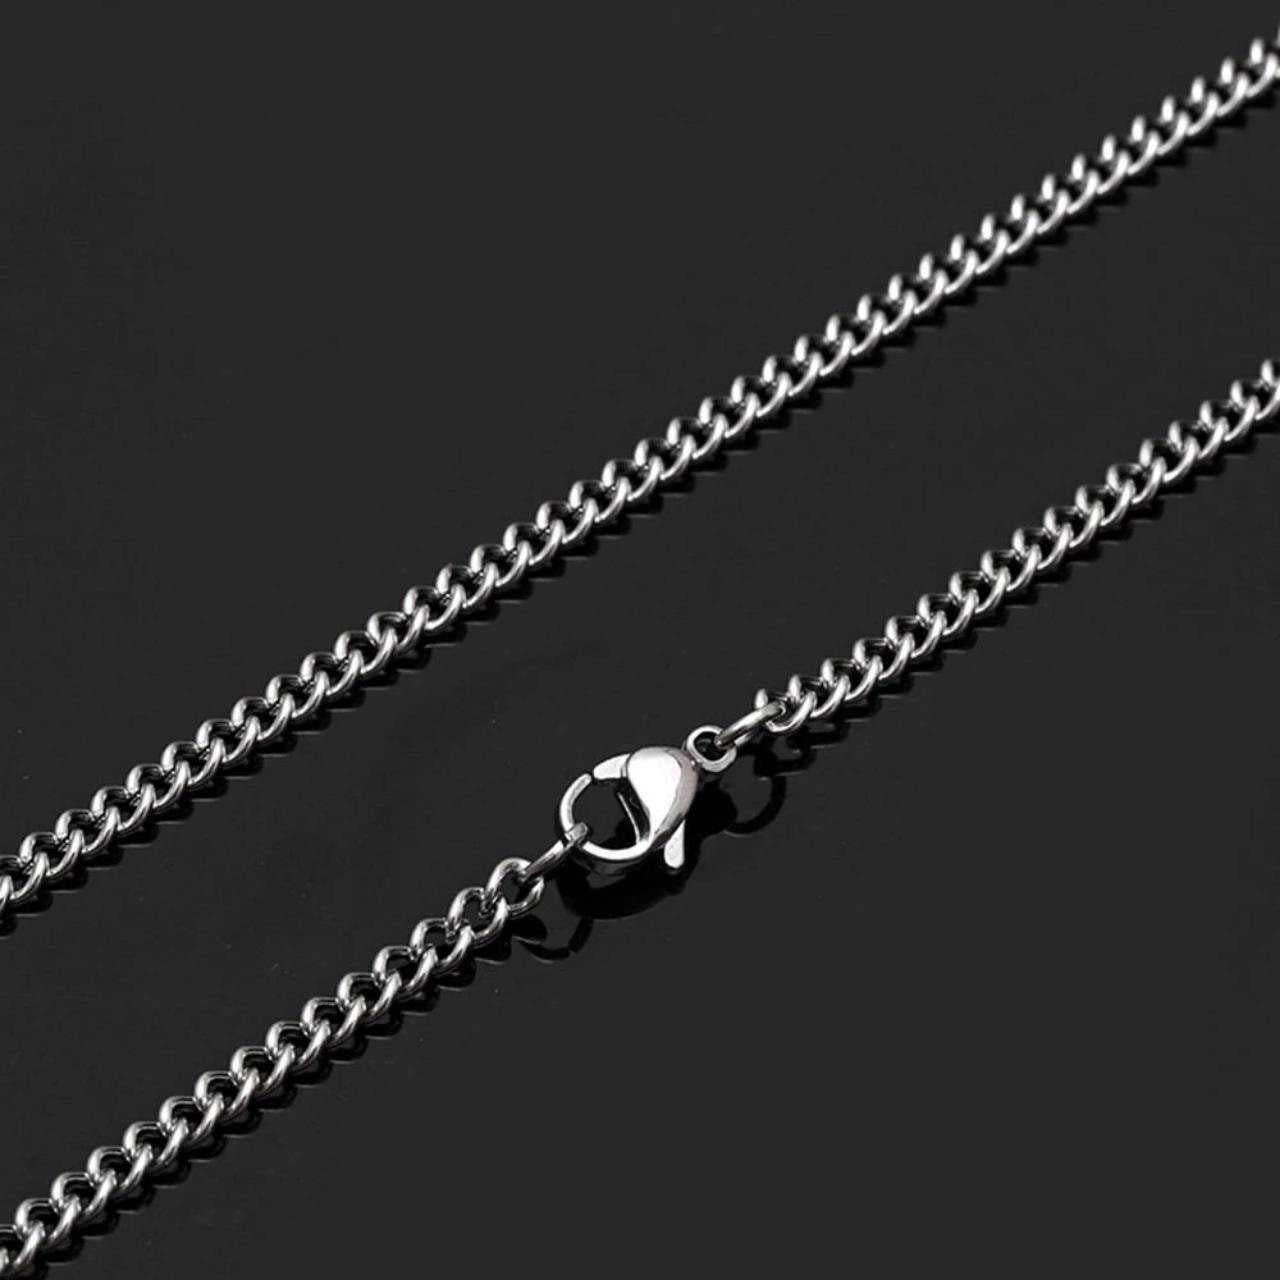 CRW Tribal Skull Necklace with 1.8mm curb chain in silver - Shape Necklaces for Women - Pattern Necklace for Men - Necklace with Pendant